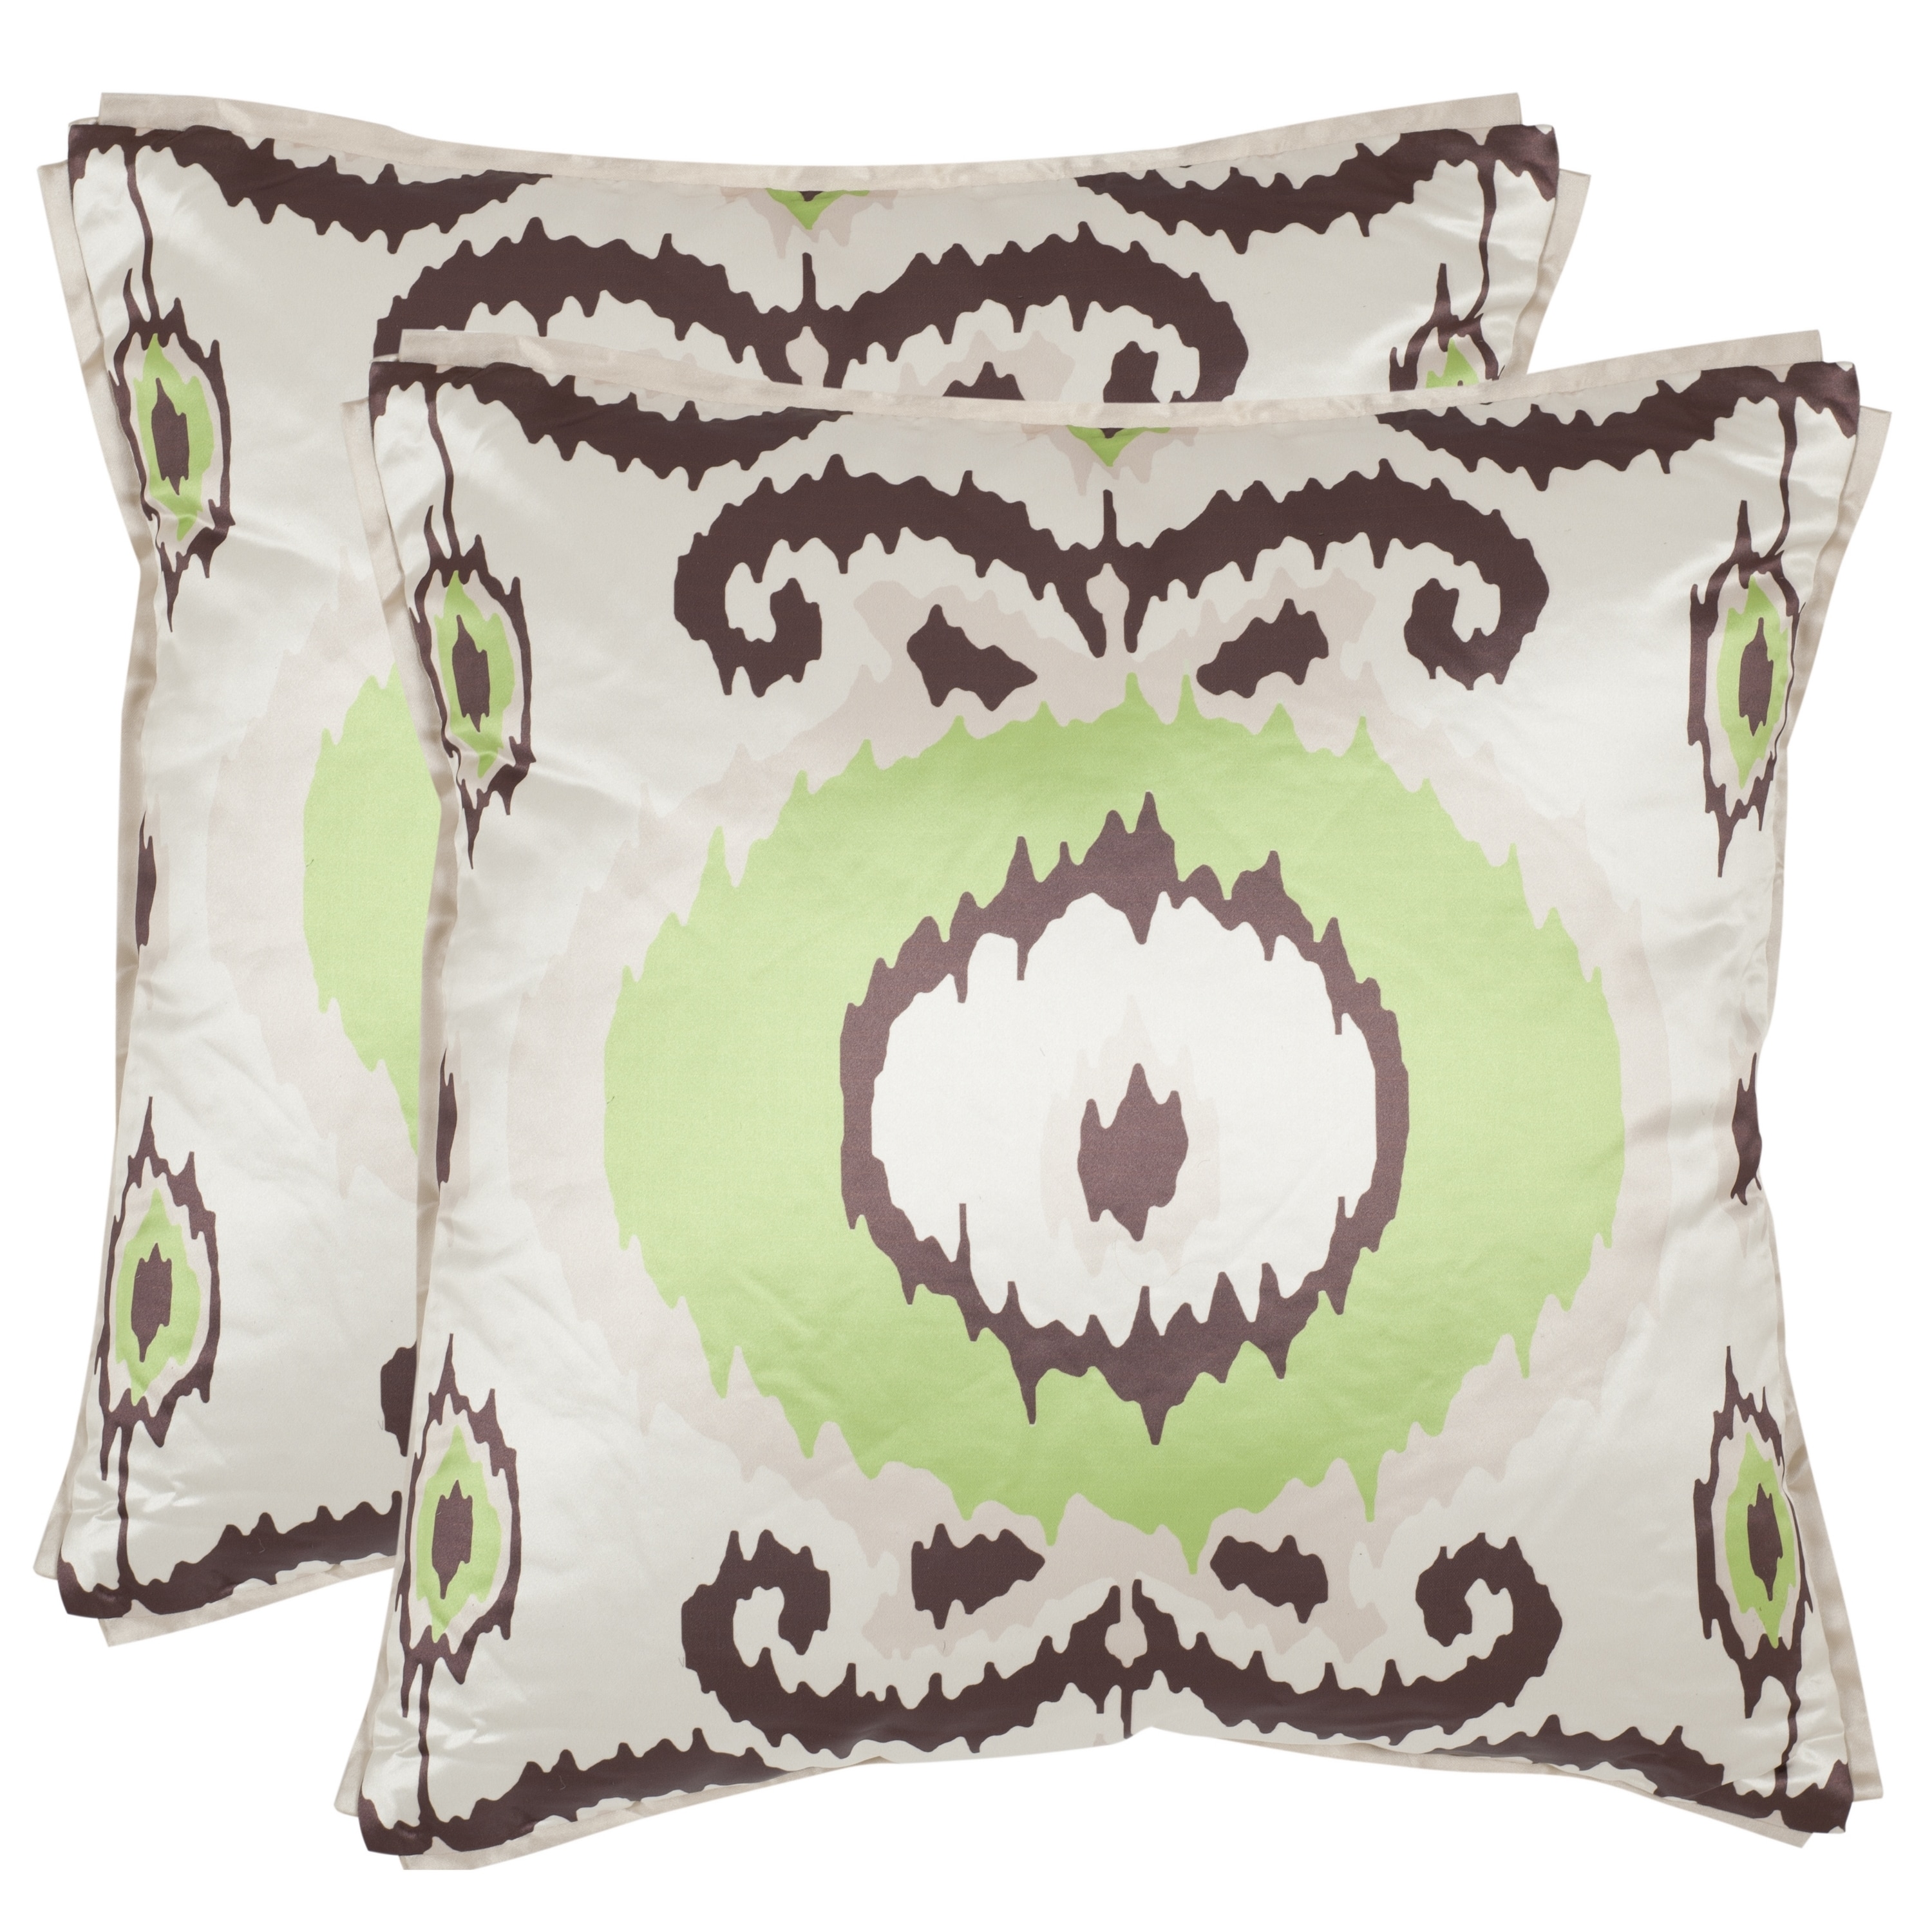 SAFAVIEH Giselle 18-inch Lime Green Decorative Pillows (Set of 2)